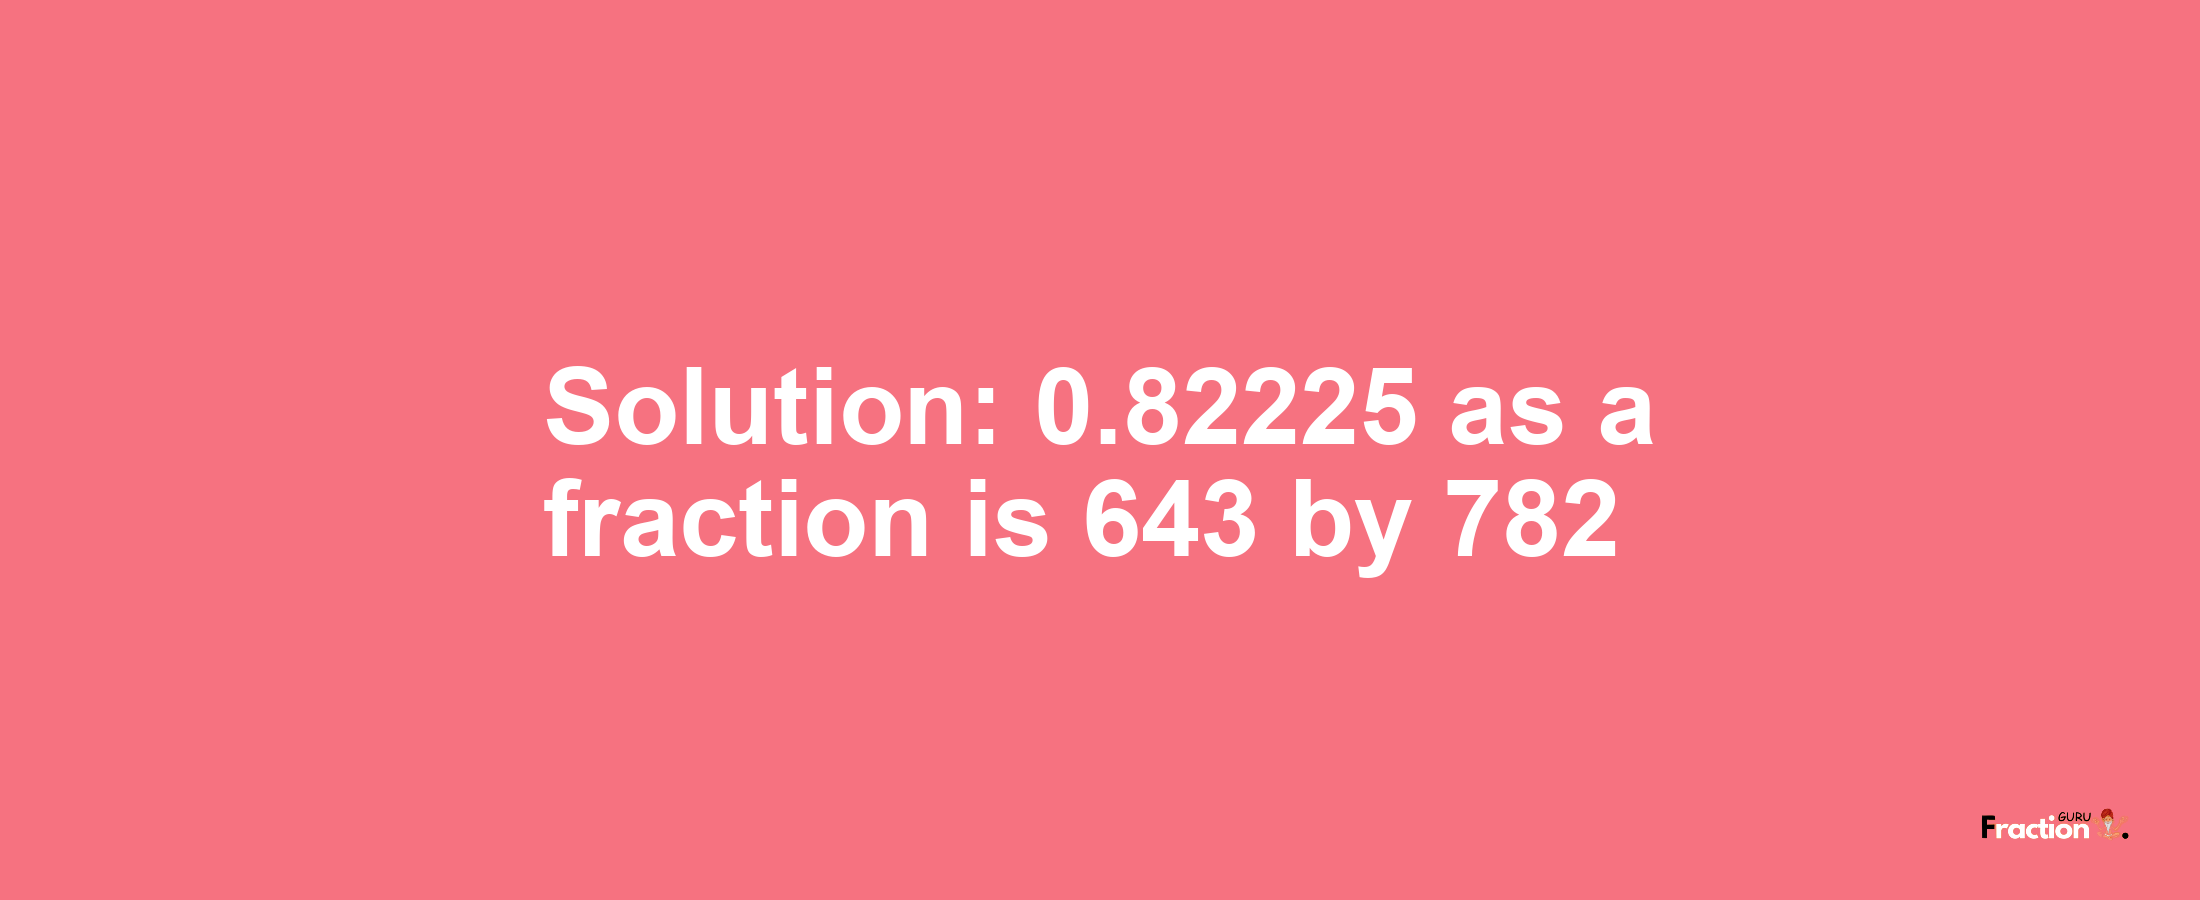 Solution:0.82225 as a fraction is 643/782